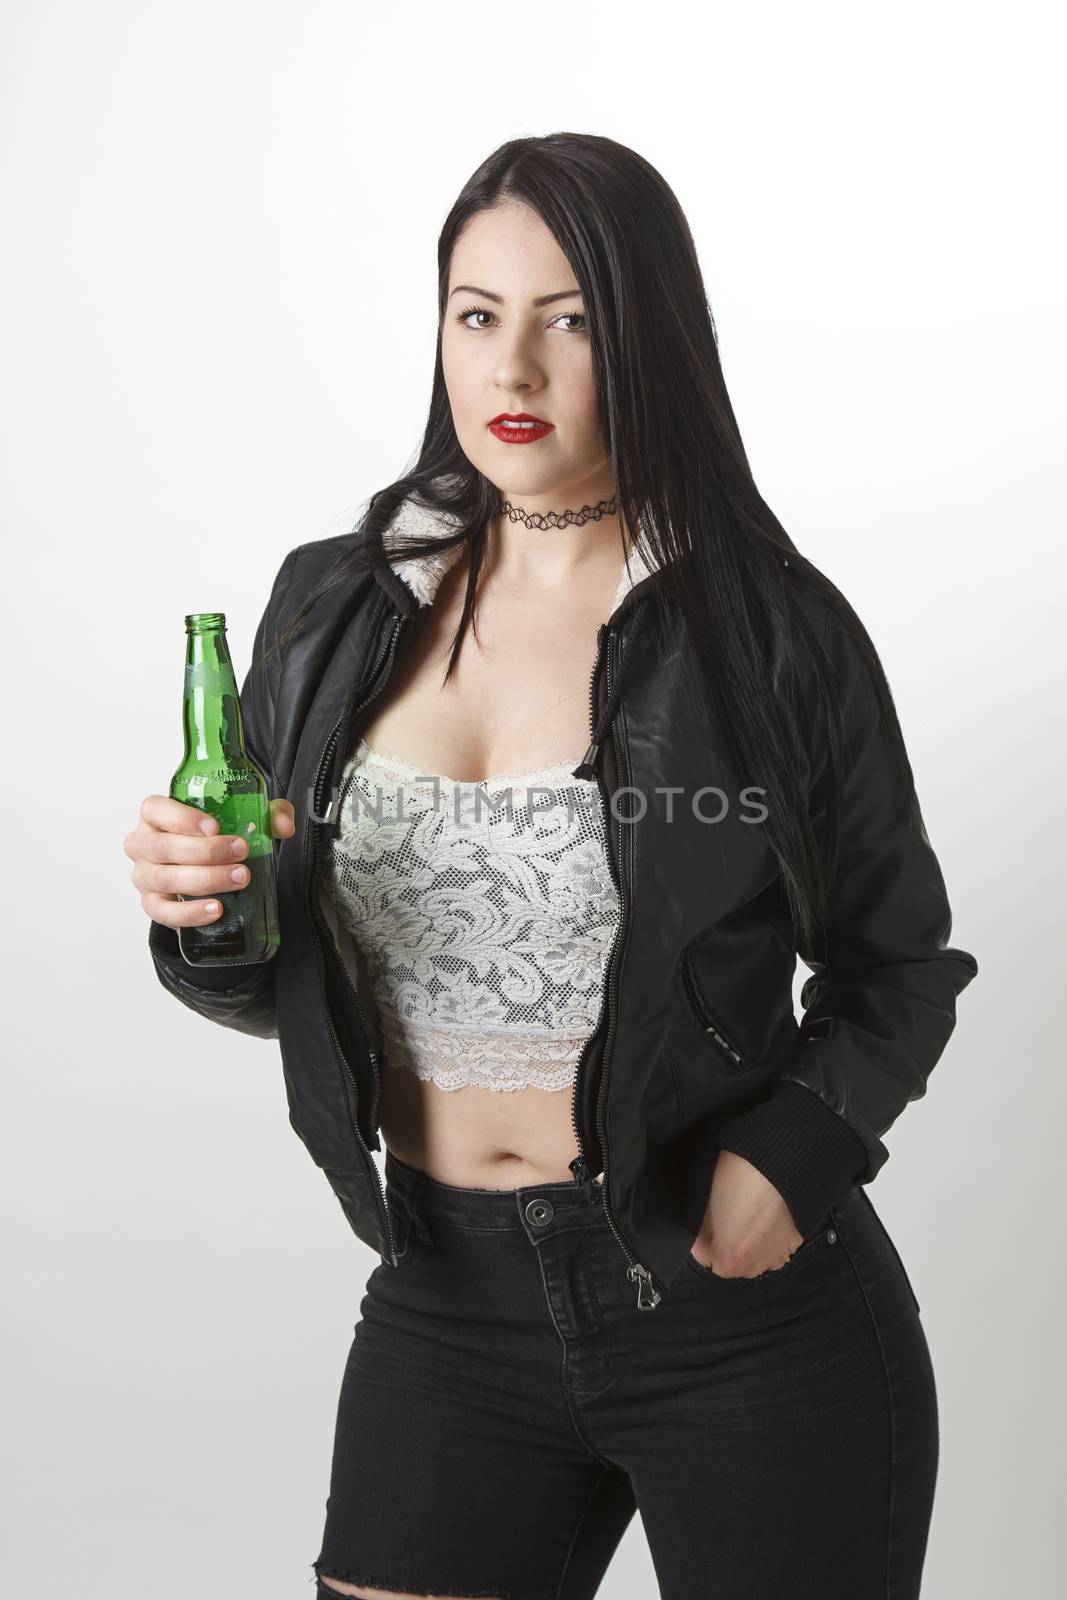 Sexy young woman in her twentie holding a green bottle of beer